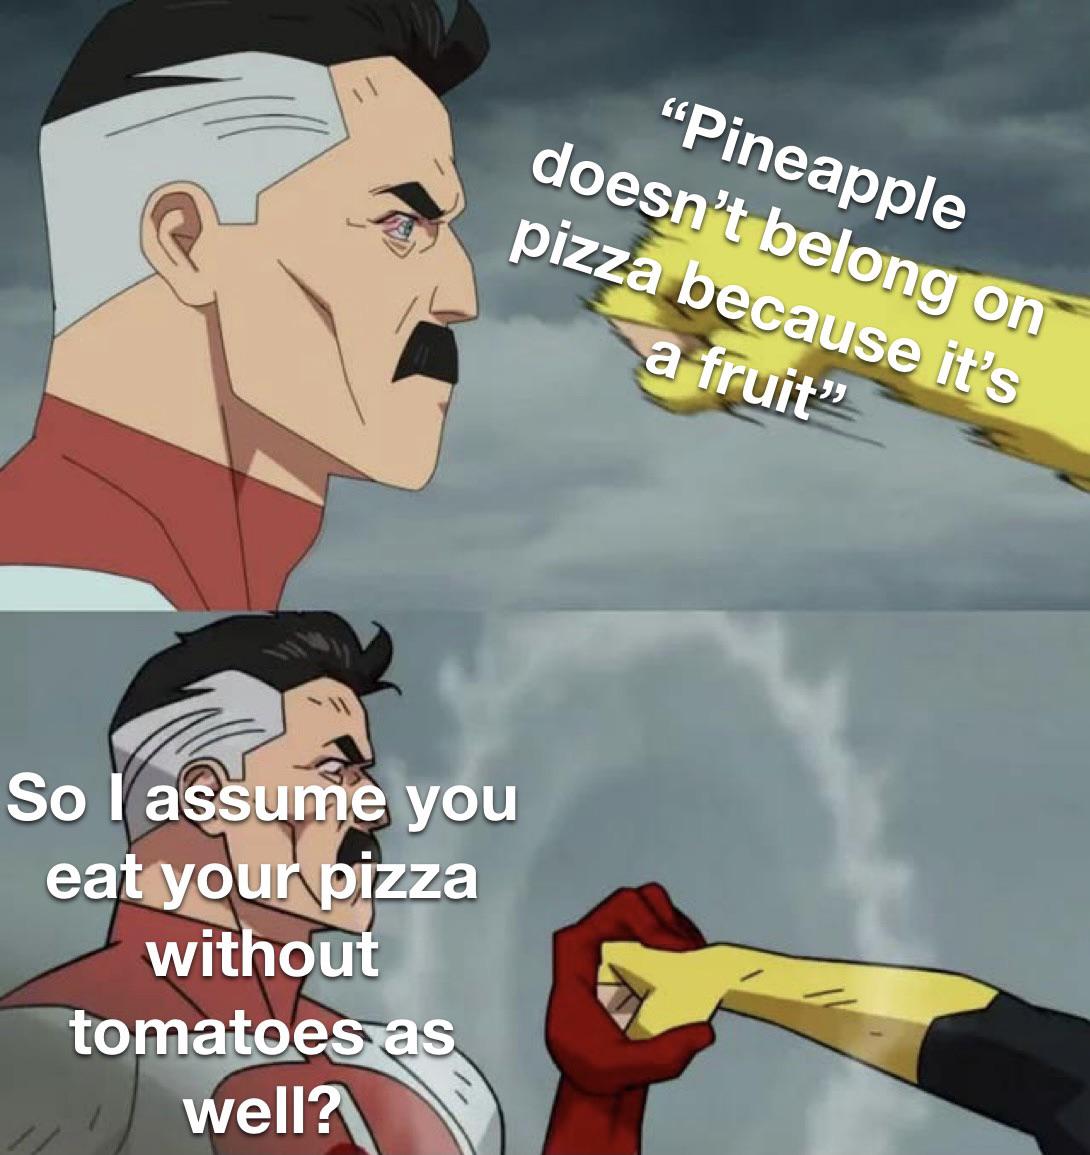 meme omni man blocks a punch - "Pineapple doesn't belong on pizza because it's a fruit So I assume you eat your pizza without tomatoes as well?